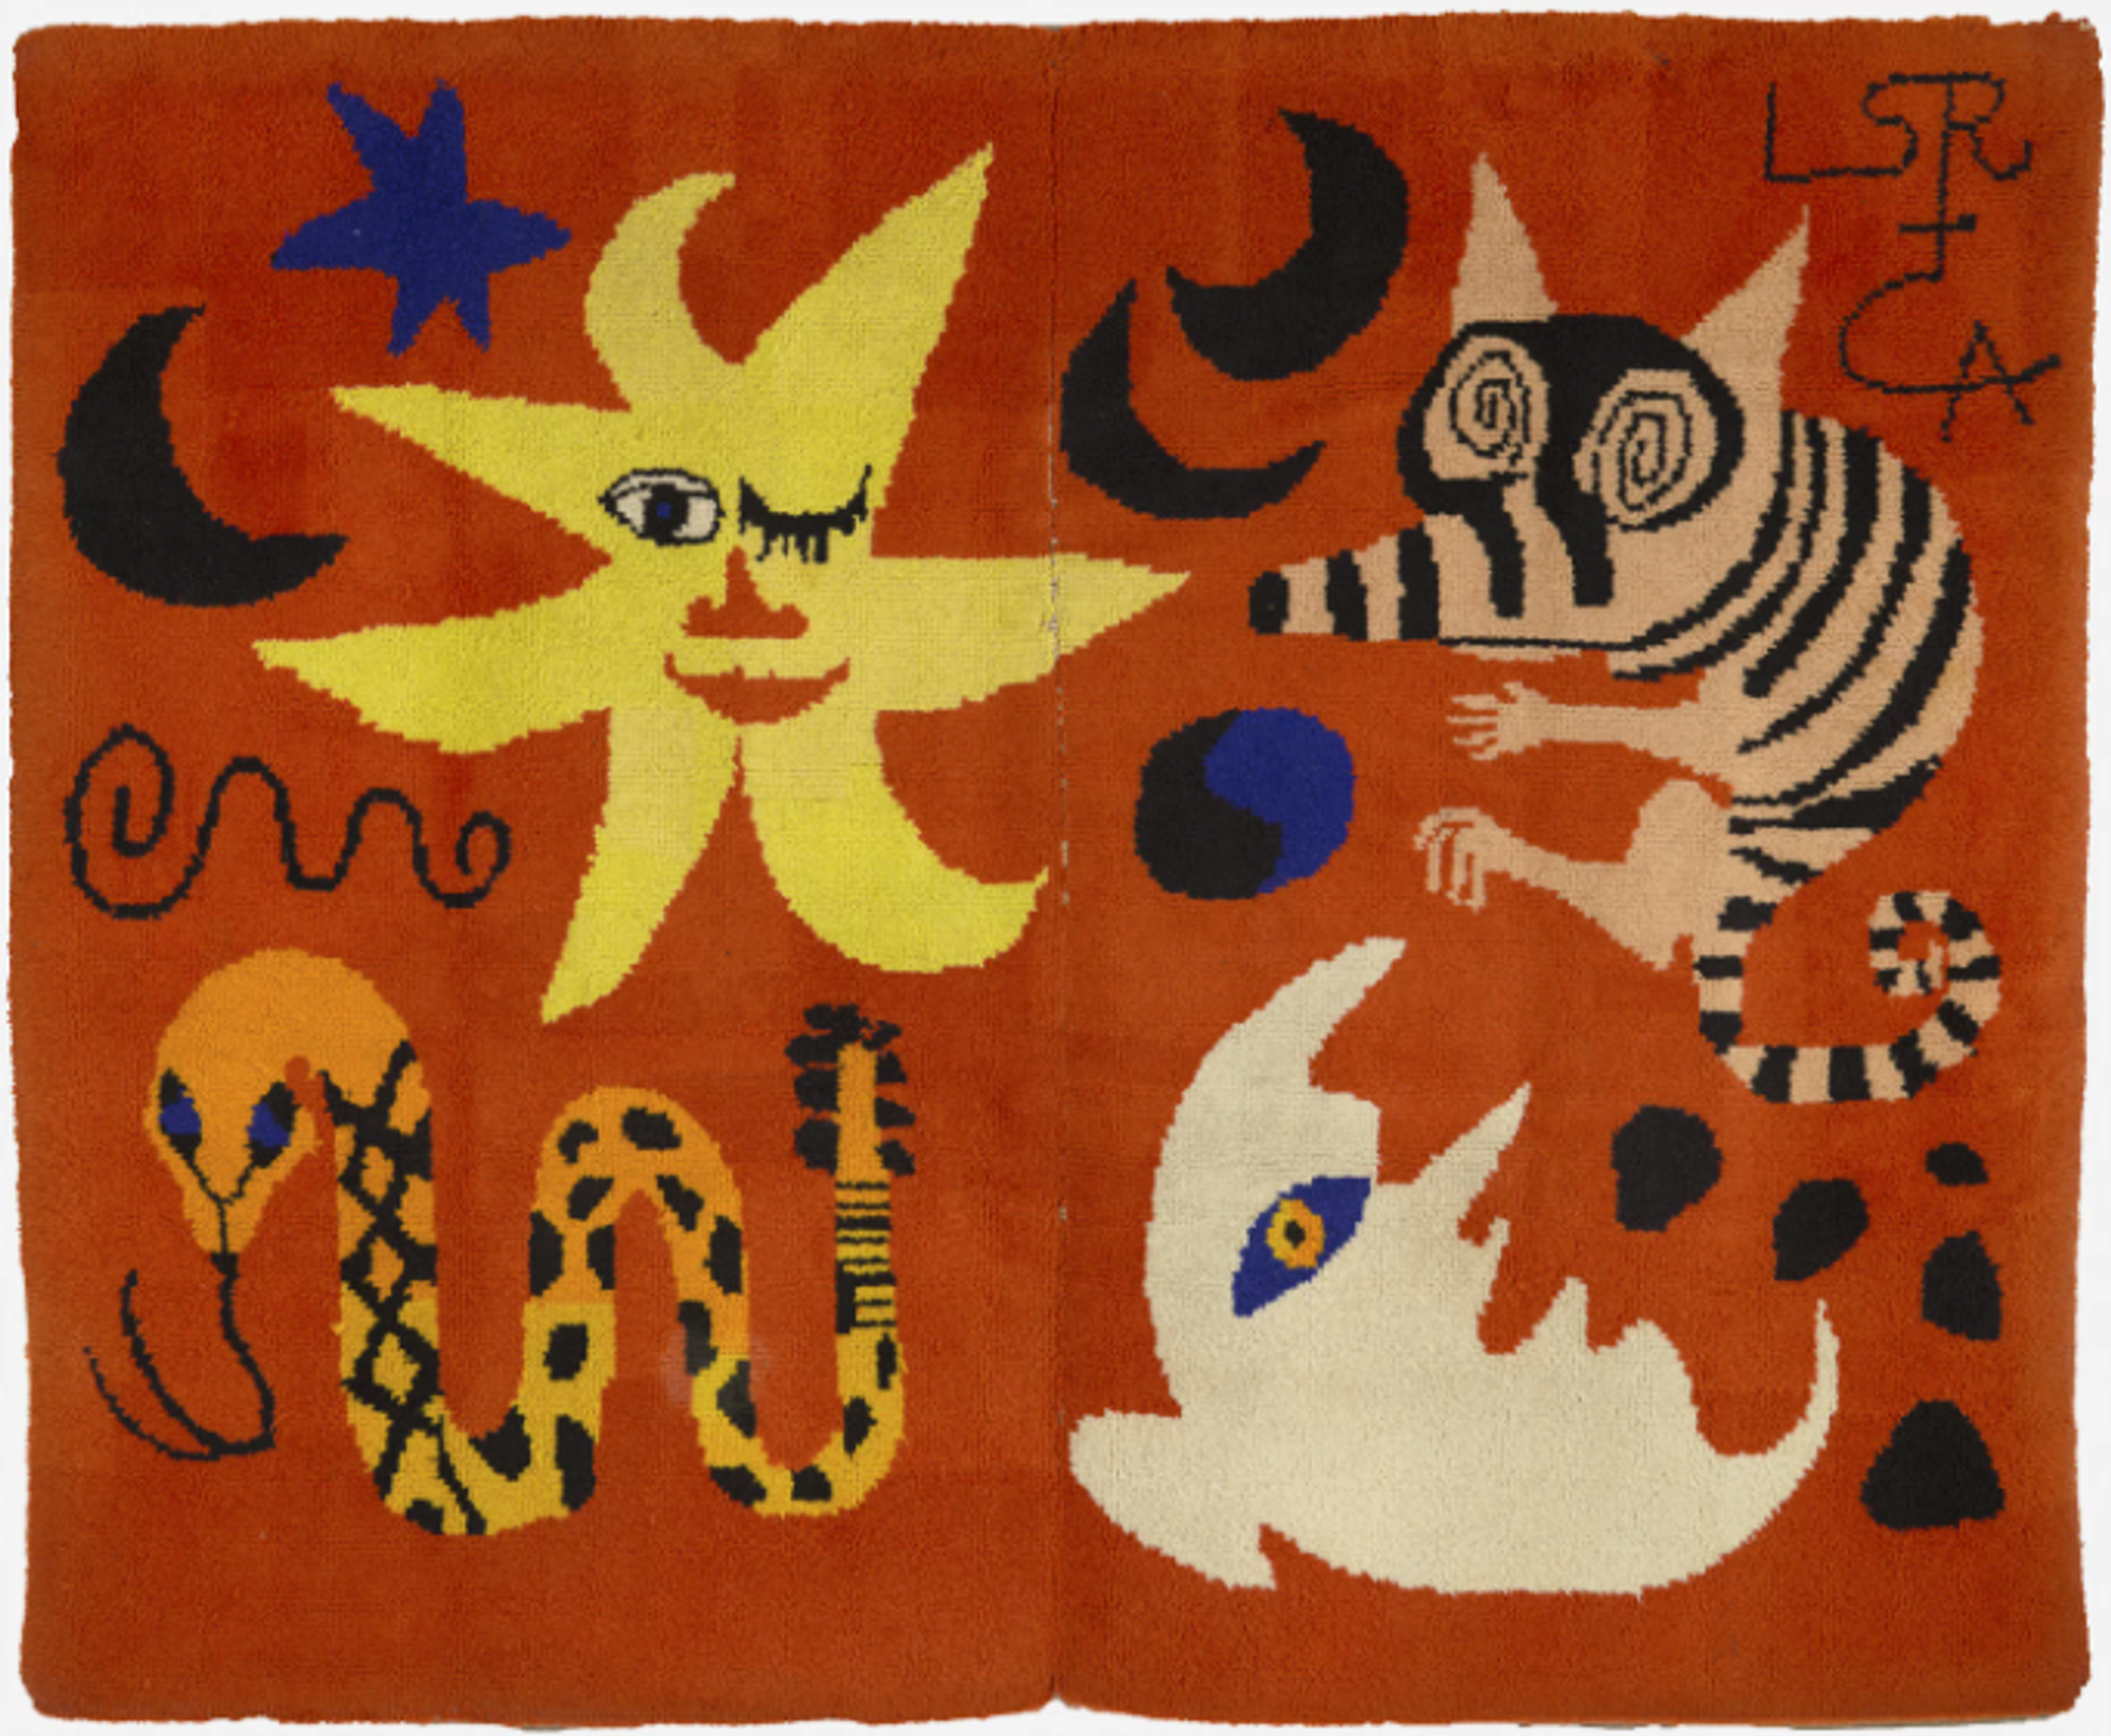 An untitled 64-by-81-inch latch-hooked rug by sculptor Alexander Calder will be part of a collaborative traveling exhibit between the Wadsworth and museums from South Carolina and Alabama.